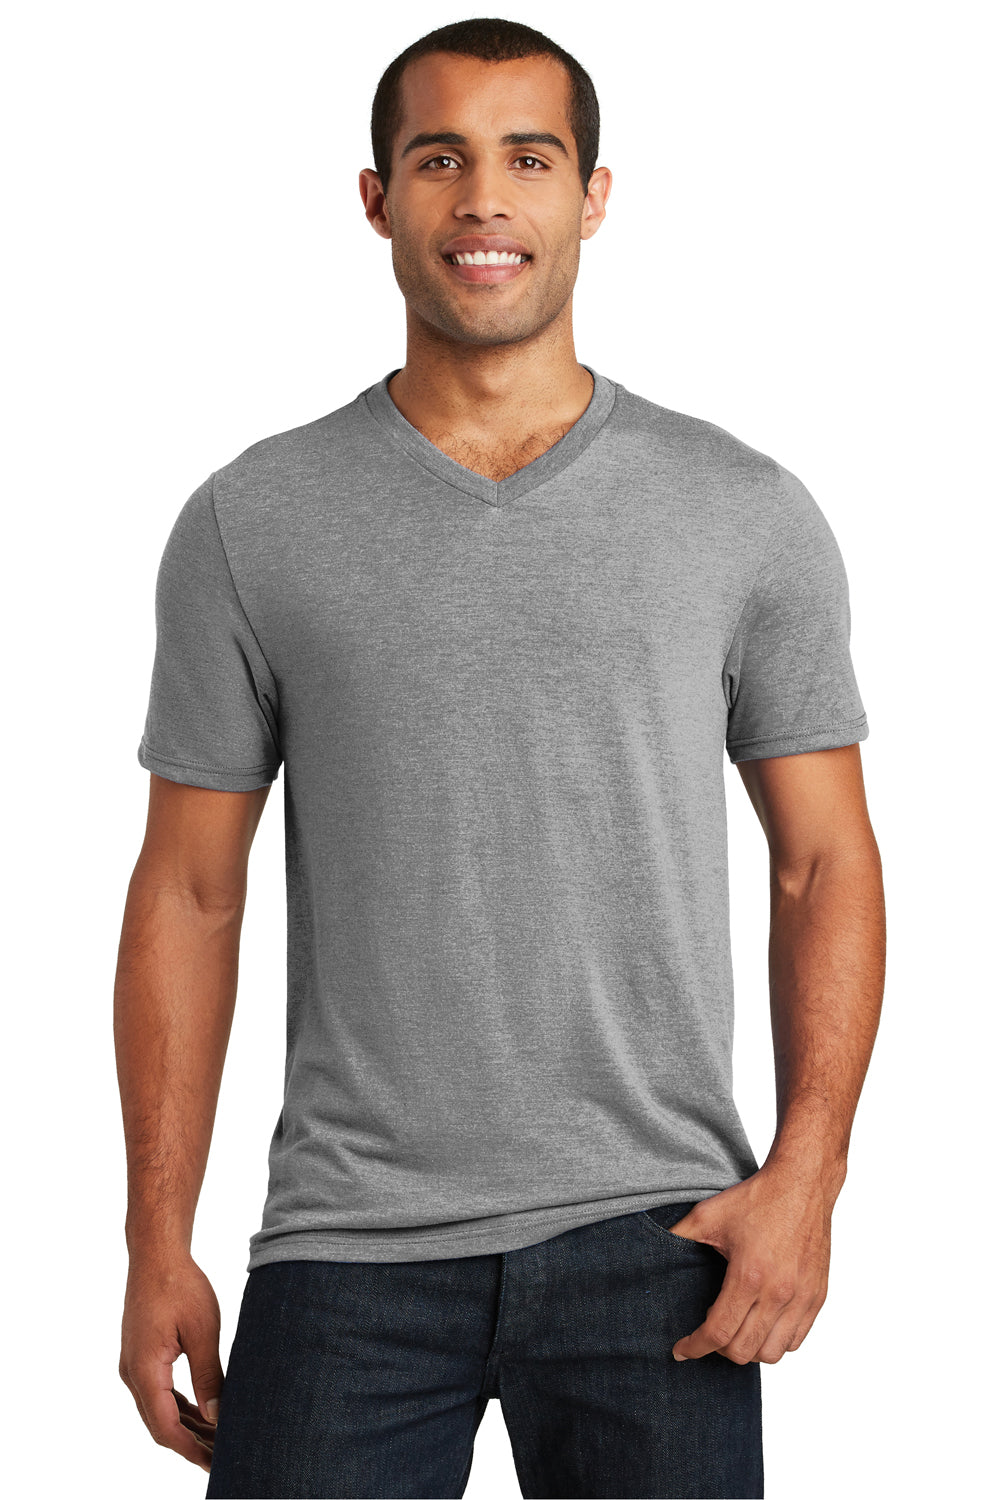 District DT1350 Mens Perfect Tri Short Sleeve V-Neck T-Shirt Grey Frost Front